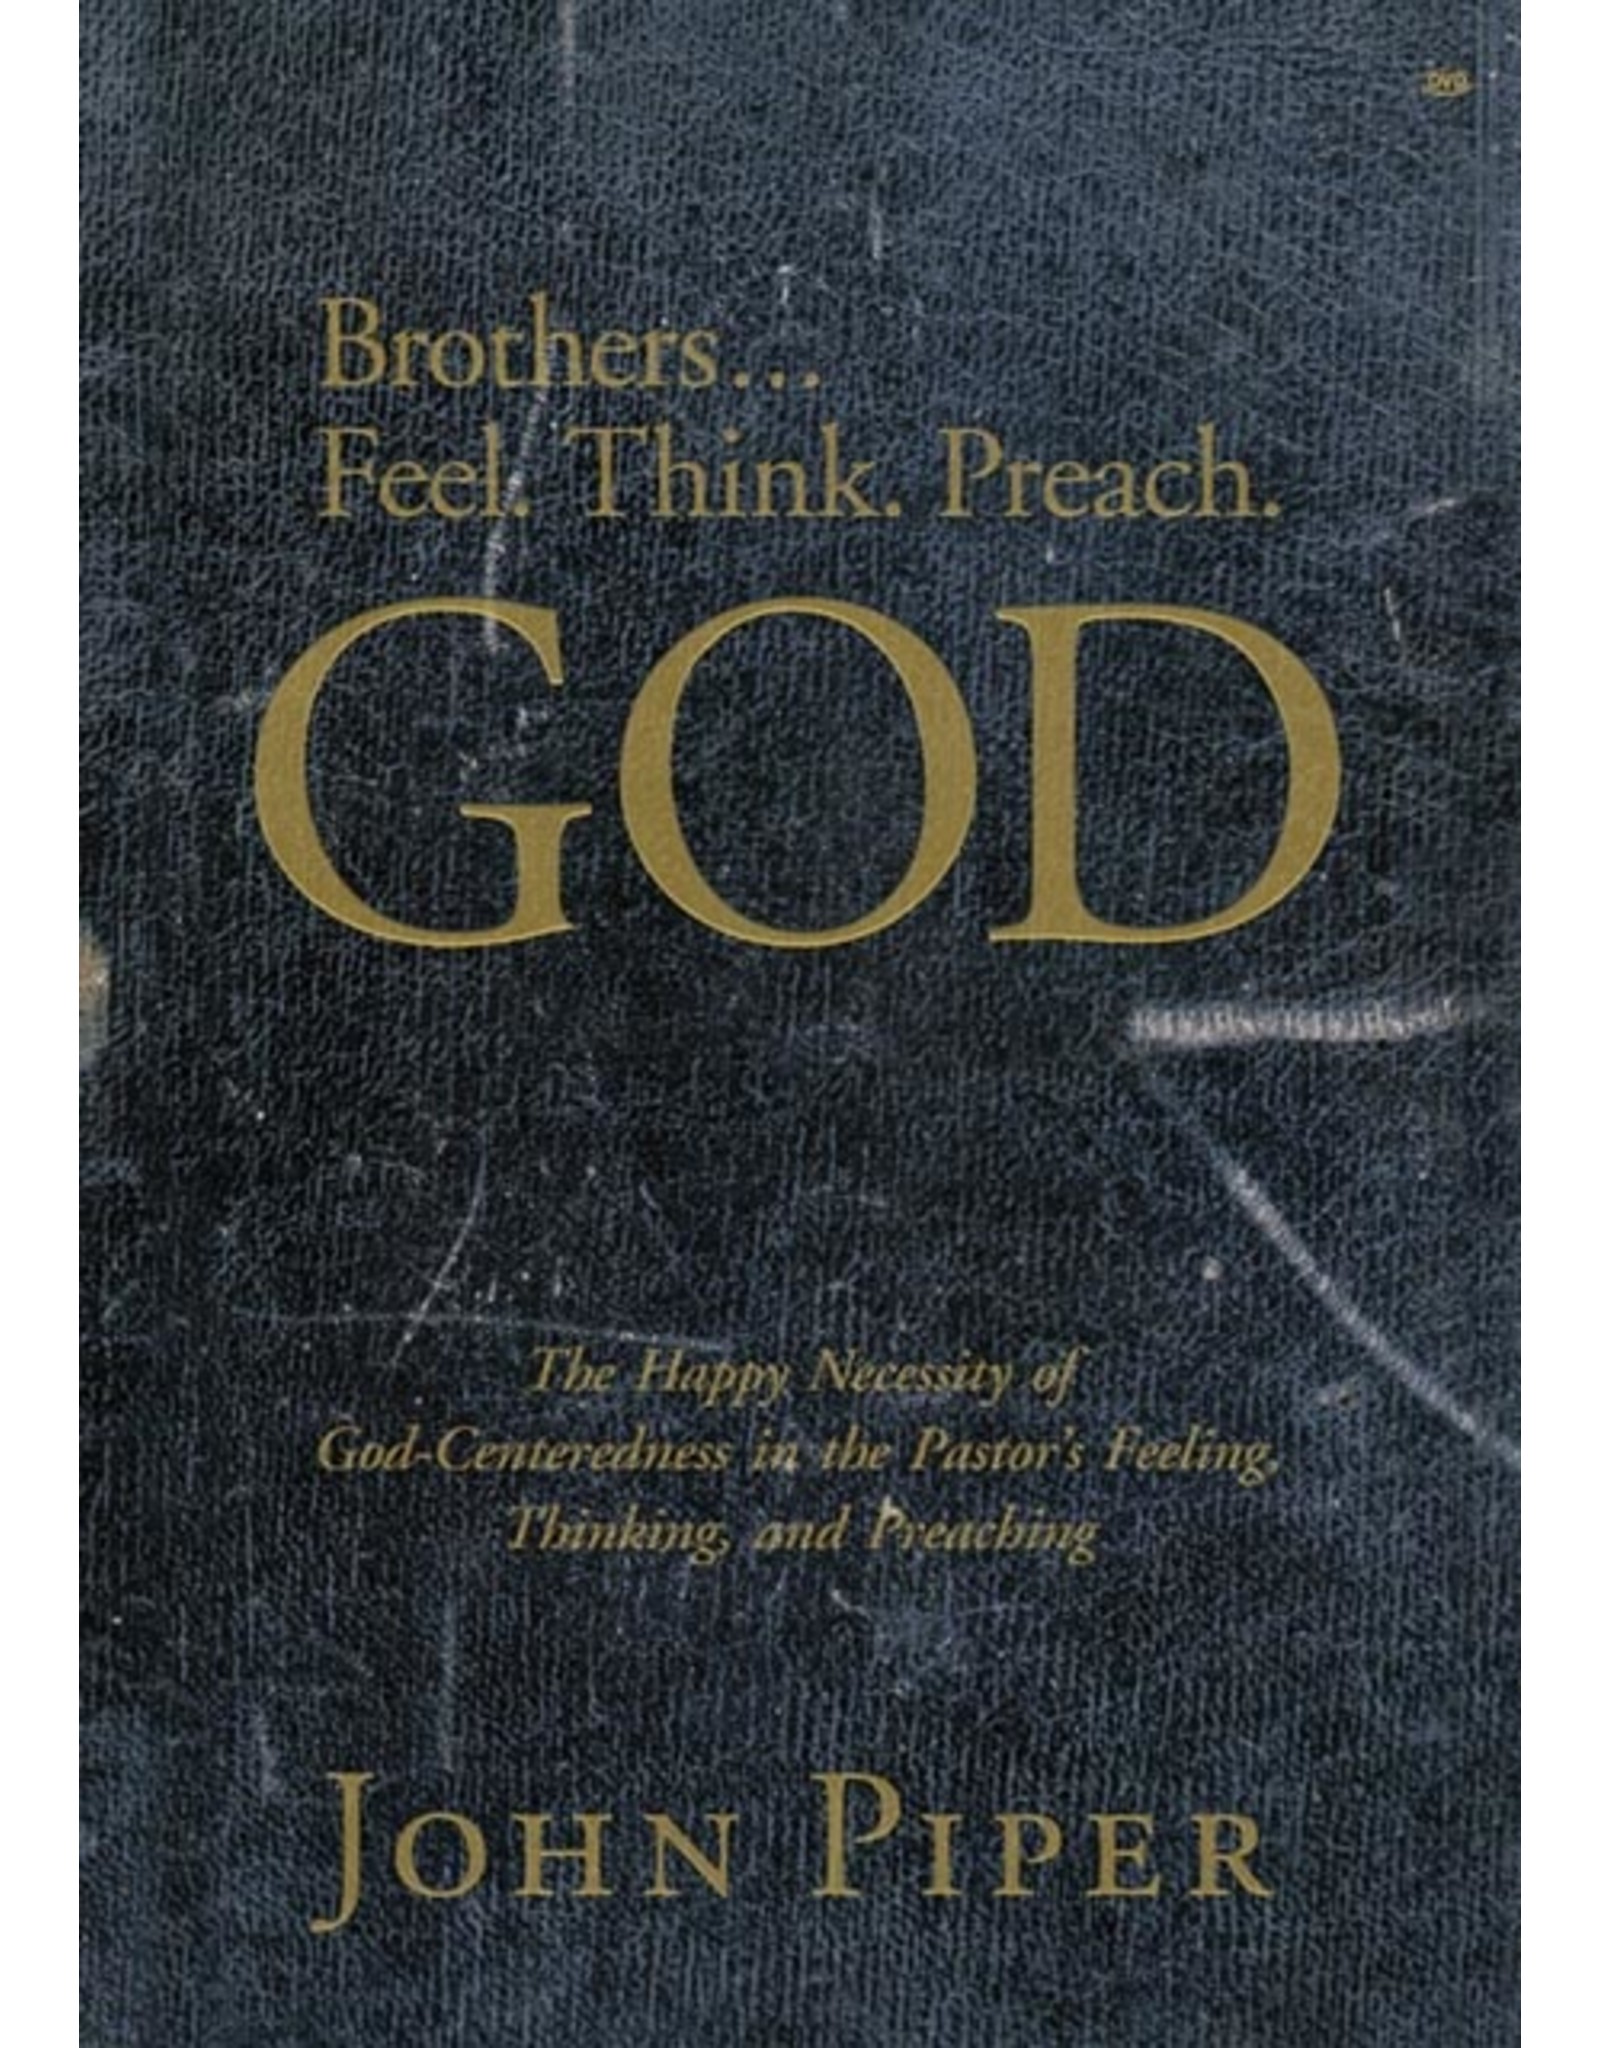 Desiring God Brothers... Feel, Think, Preach God: The Happy Necessity of God-Centeredness in the Pastor's Feeling, Thinking, and Preaching (DVD)